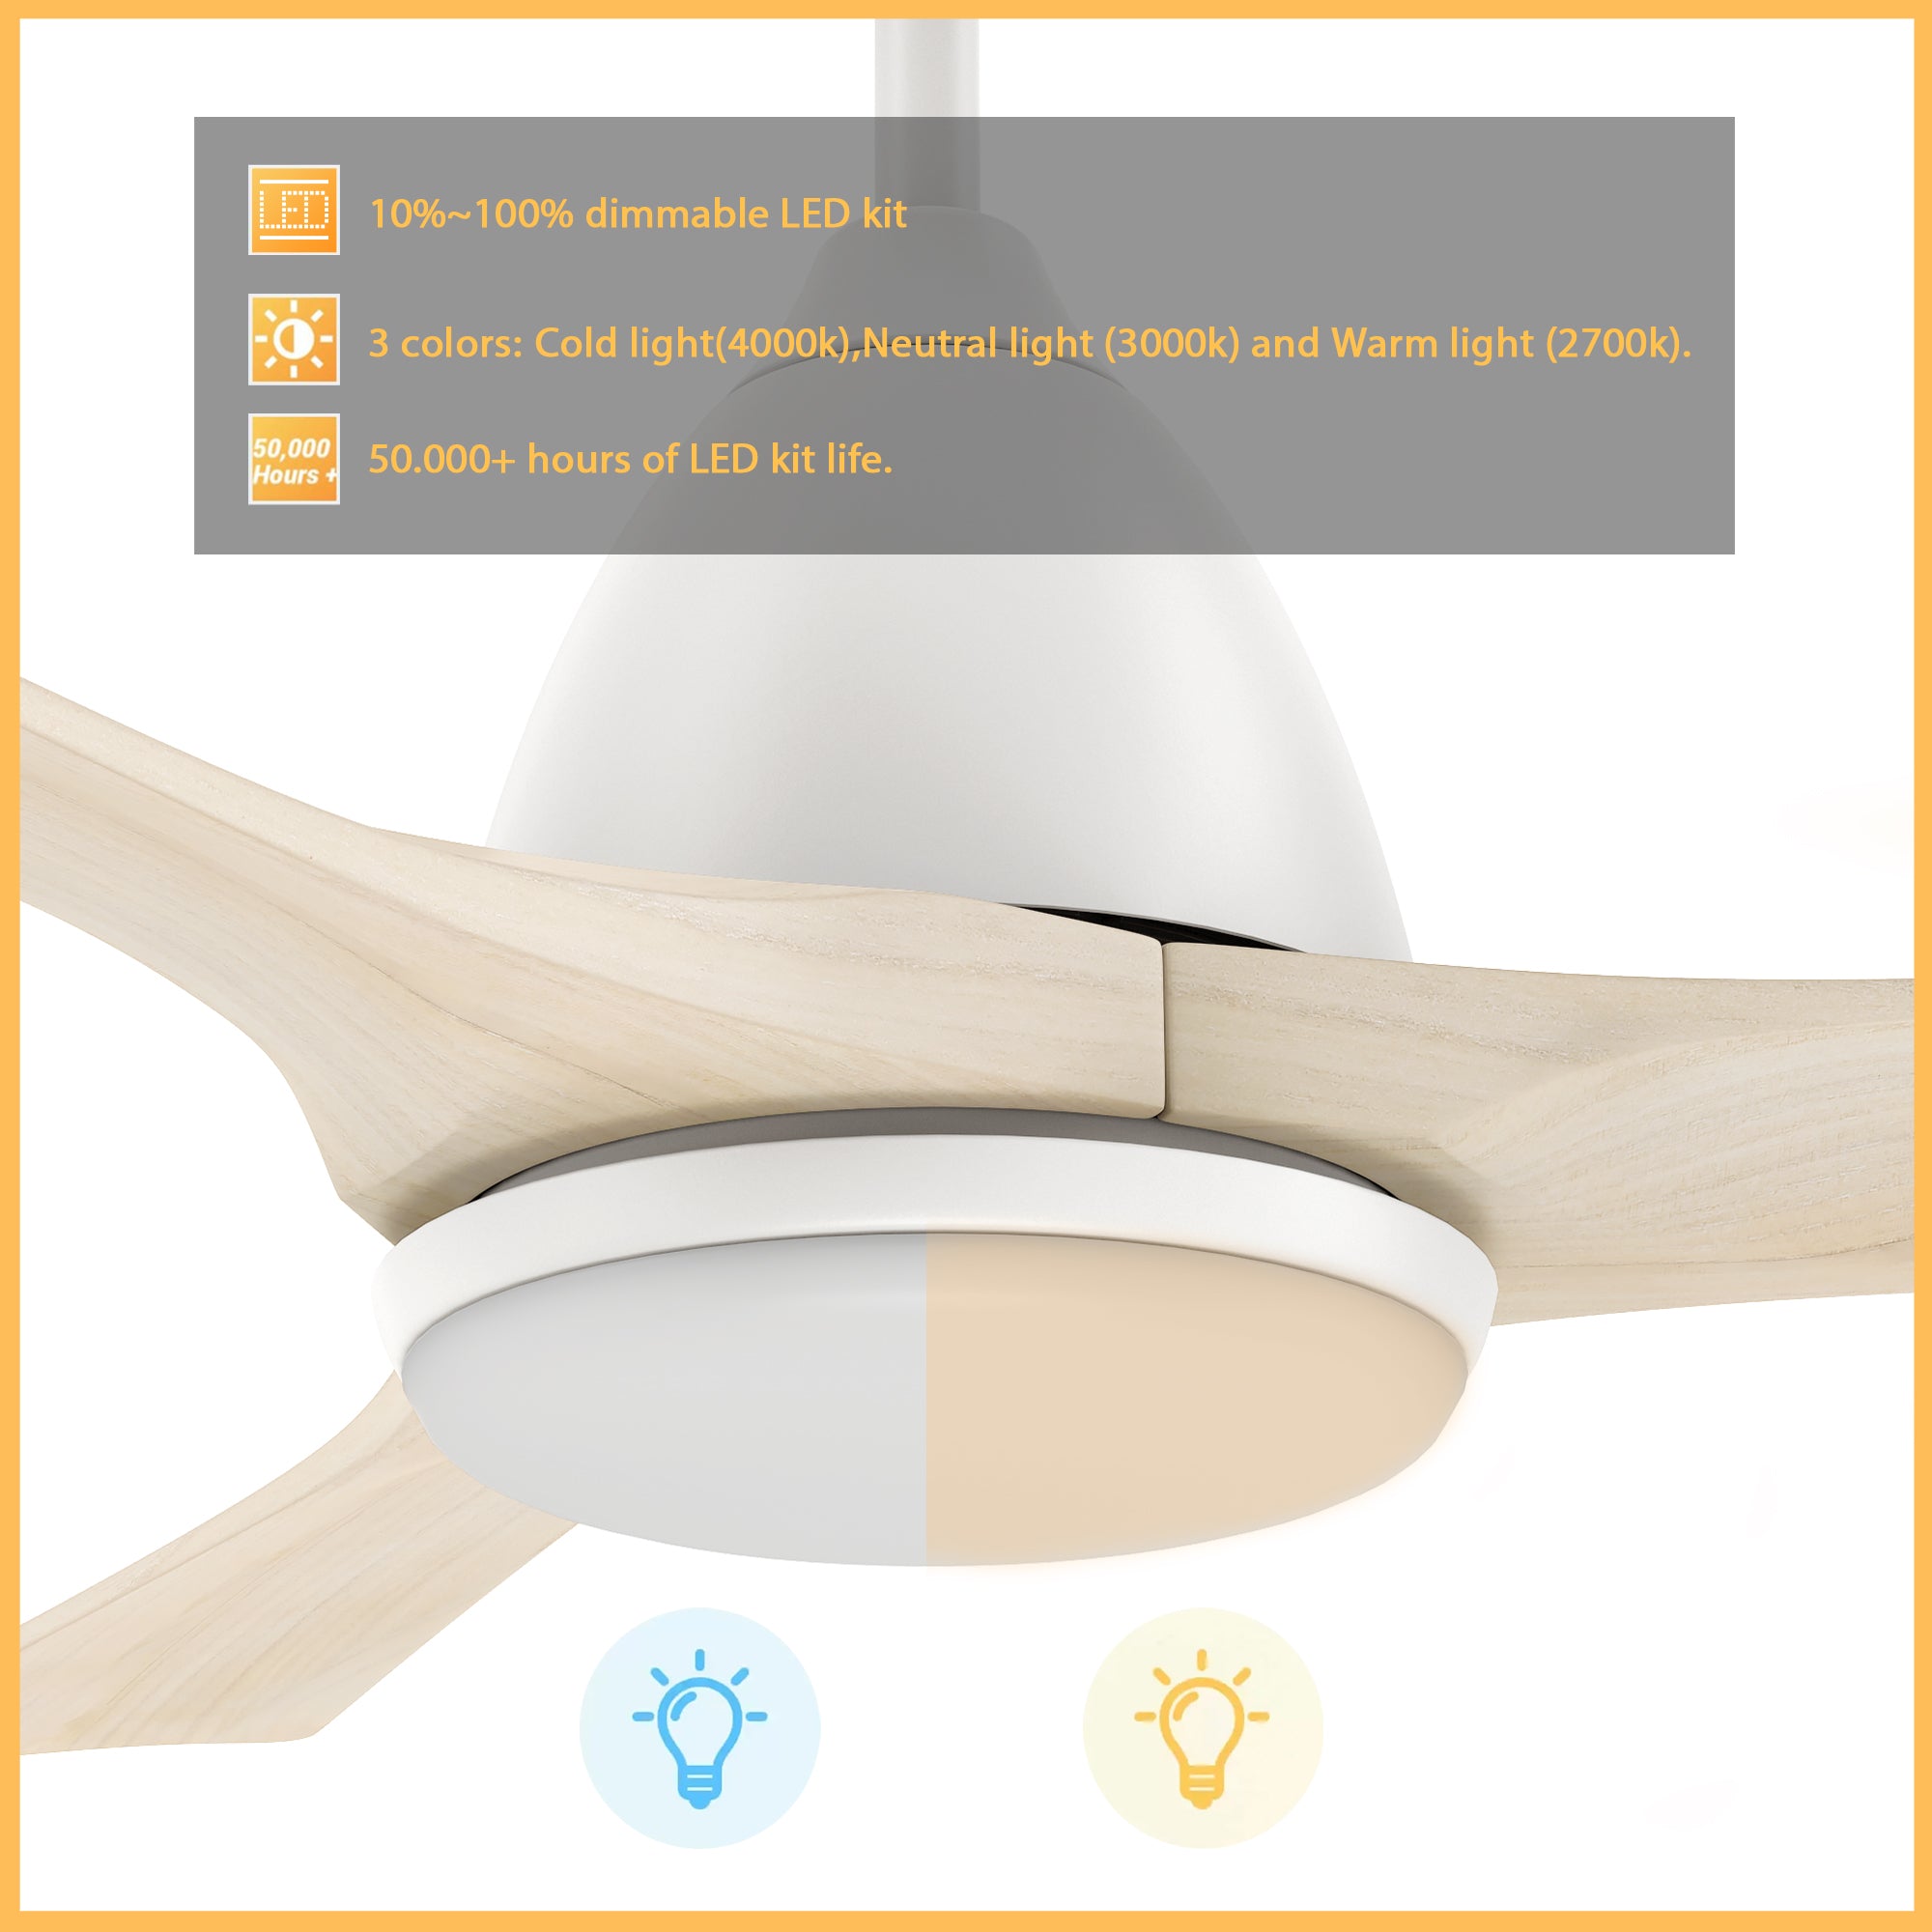 This Cadiz 52'' smart ceiling fan keeps your space cool, bright, and stylish. It is a soft modern masterpiece perfect for your large indoor living spaces. This Wifi smart ceiling fan is a simplicity designing with White finish, use elegant Solid Wood blades and has an integrated 4000K LED daylight. The fan features Remote control, Wi-Fi apps, Siri Shortcut and Voice control technology (compatible with Amazon Alexa and Google Home Assistant ) to set fan preferences. #color_light-wood